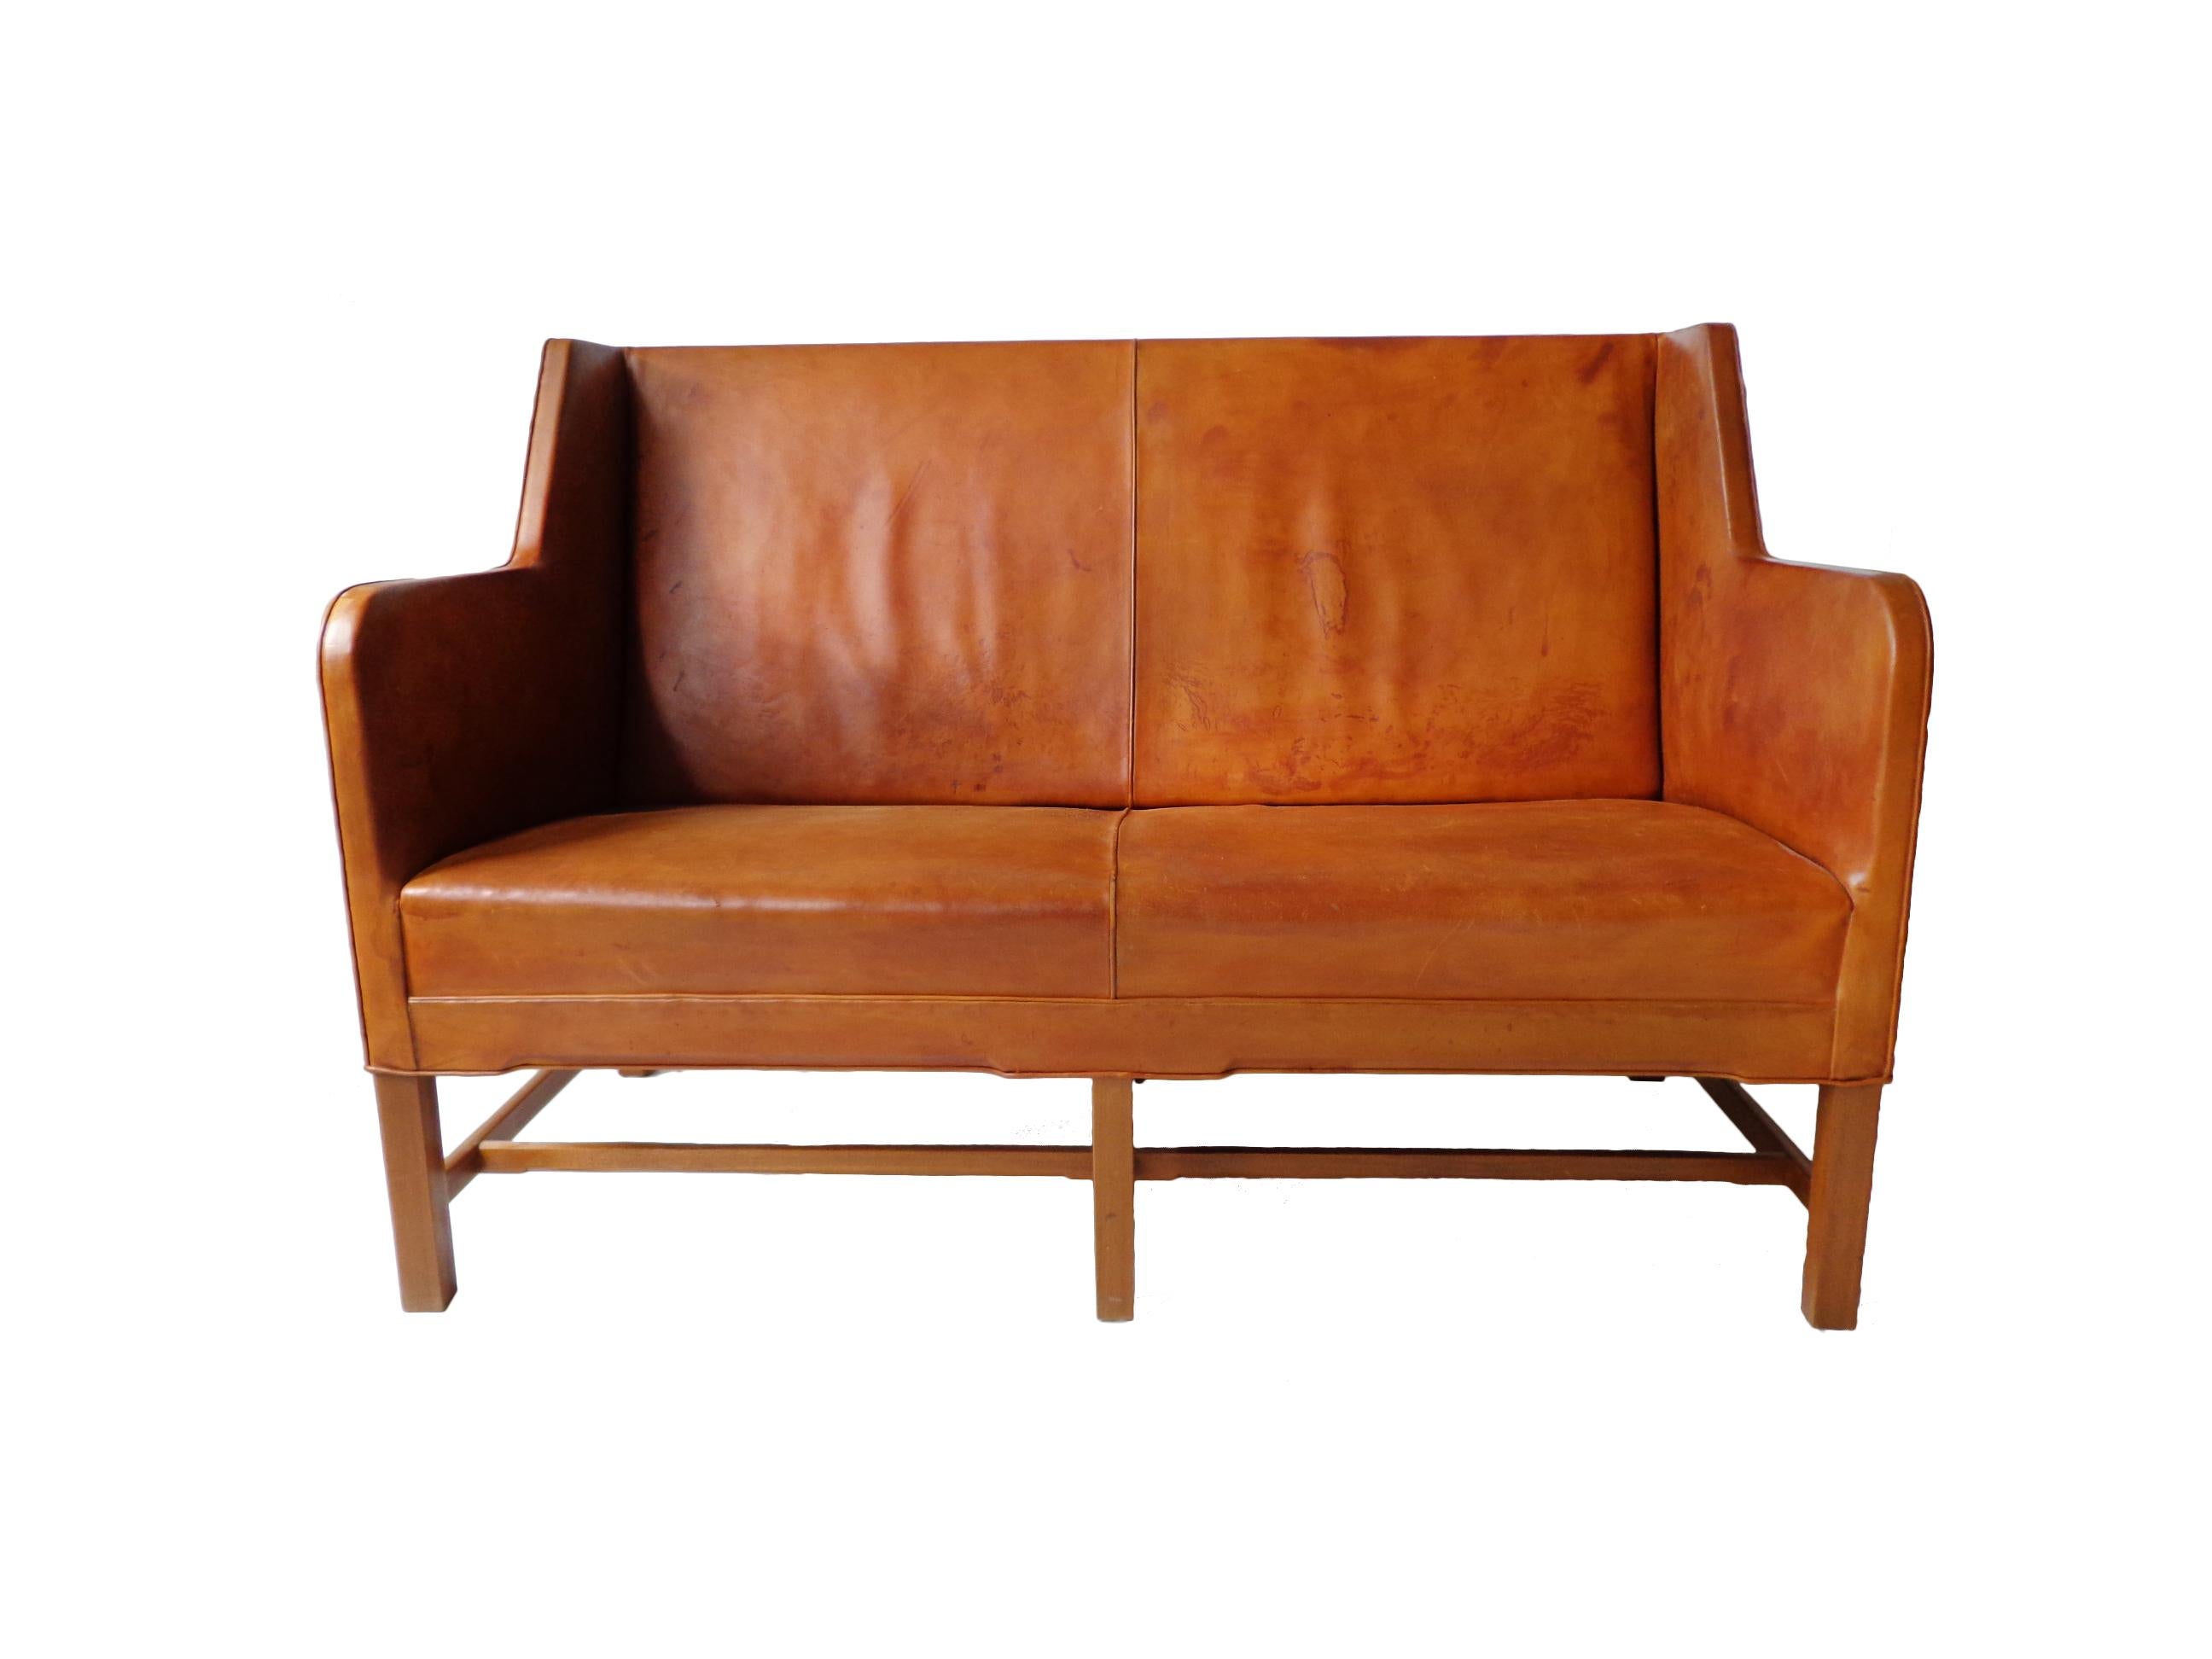 Two-seater sofa model 5011 in original cognac leather and six-legged mahogany base. Produced by Rud. Rasmussen Cabinetmakers, Denmark. Minor marks on the frame, patina to the leather. Back covered in original canvas.
Shown at the Copenhagen